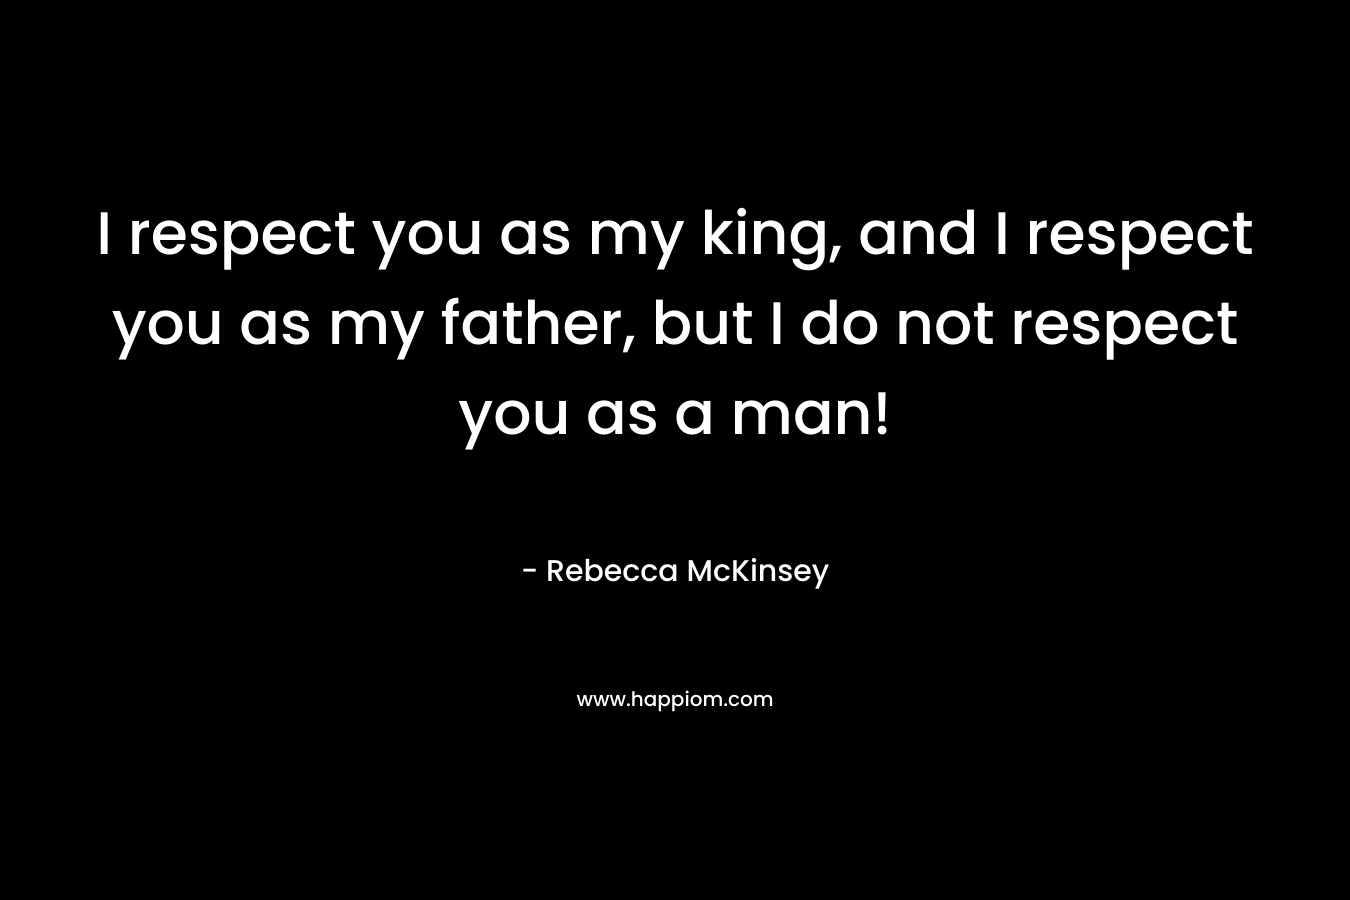 I respect you as my king, and I respect you as my father, but I do not respect you as a man!